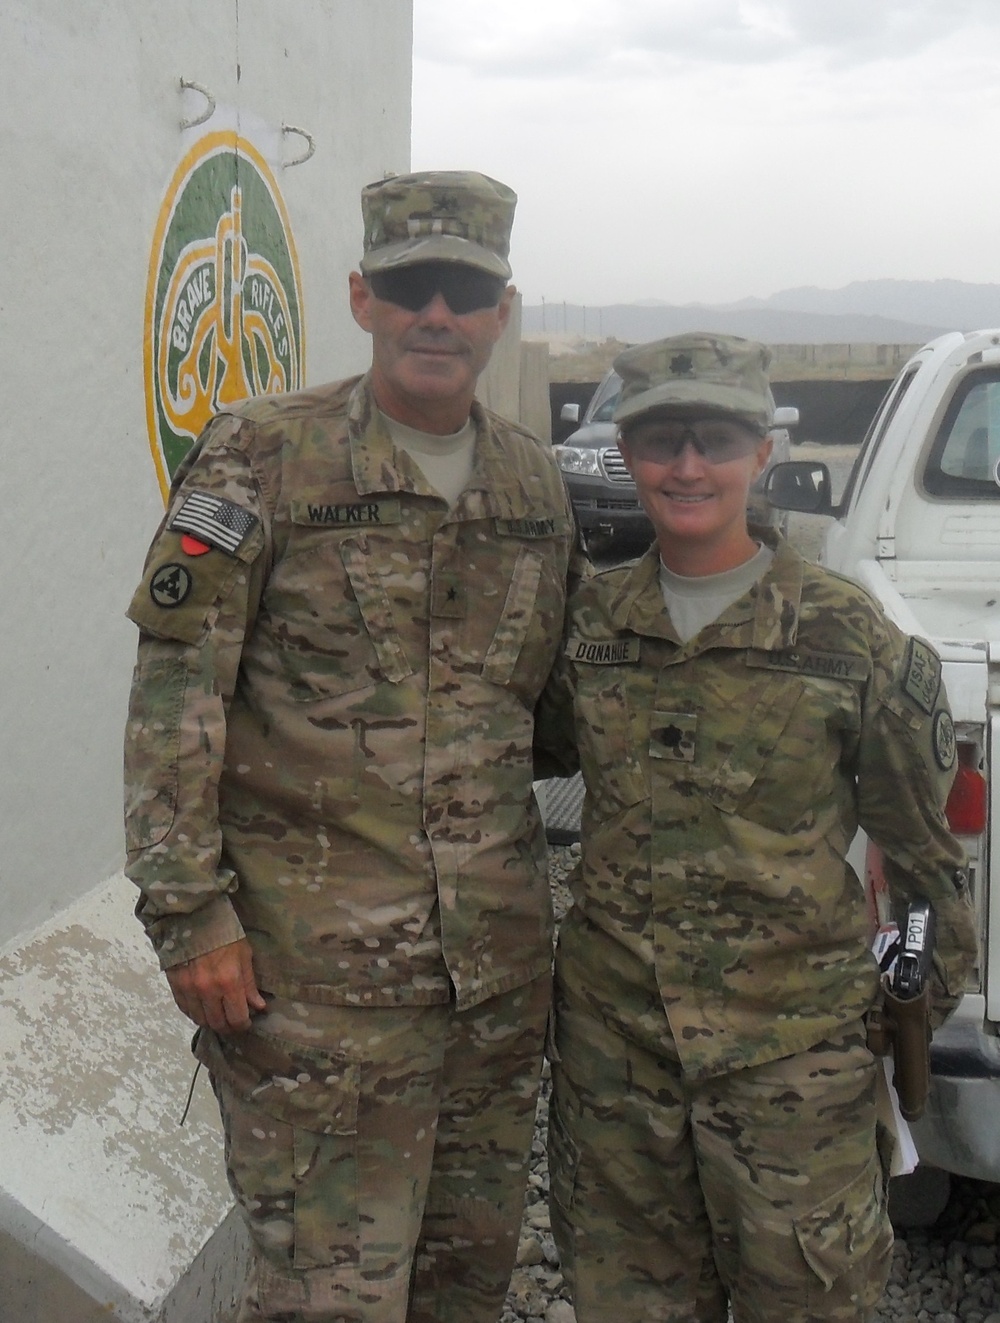 Brig. Gen. Donnie Walker Jr., commanding general of 3d Sustainment Command (Expeditionary), of Clay County, Ala., visited with Lt. Col. Michelle Donahue, Regional Support Commander, 3d Cavalry Regiment, during his visit to FOB Shank.